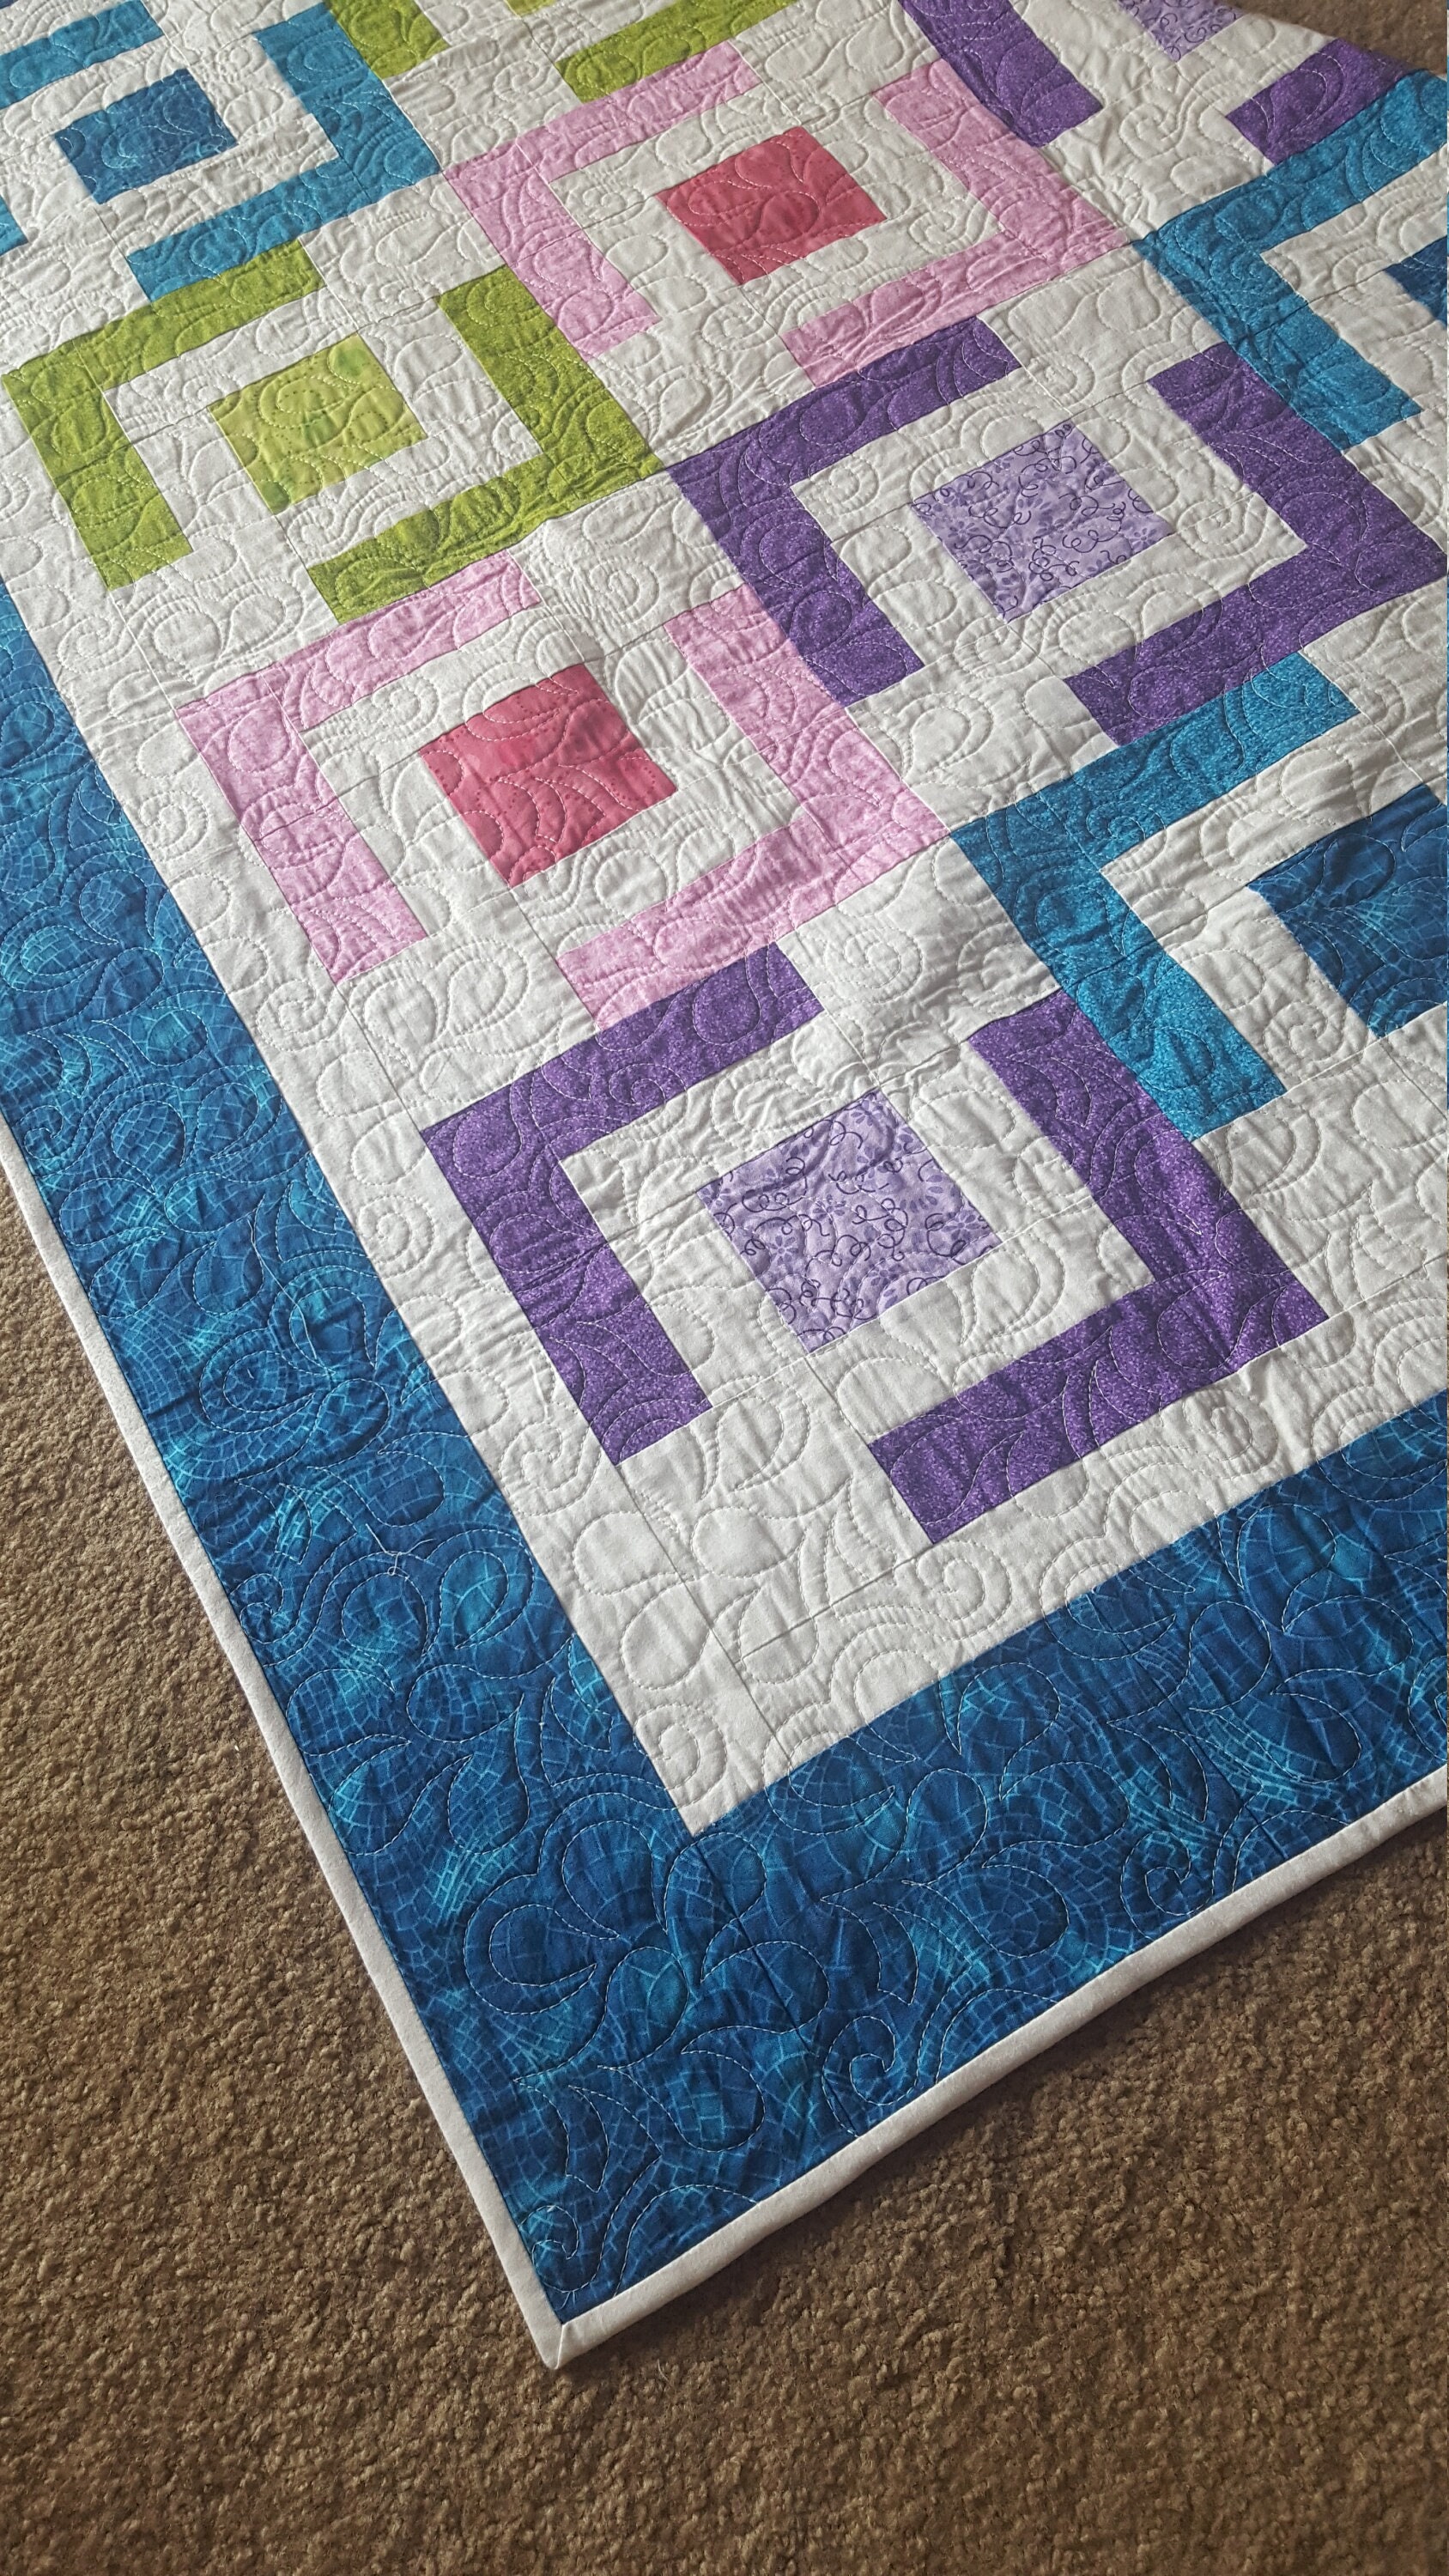 Teal and Grey Baby Quilt Kit - Jaded Spade Creations